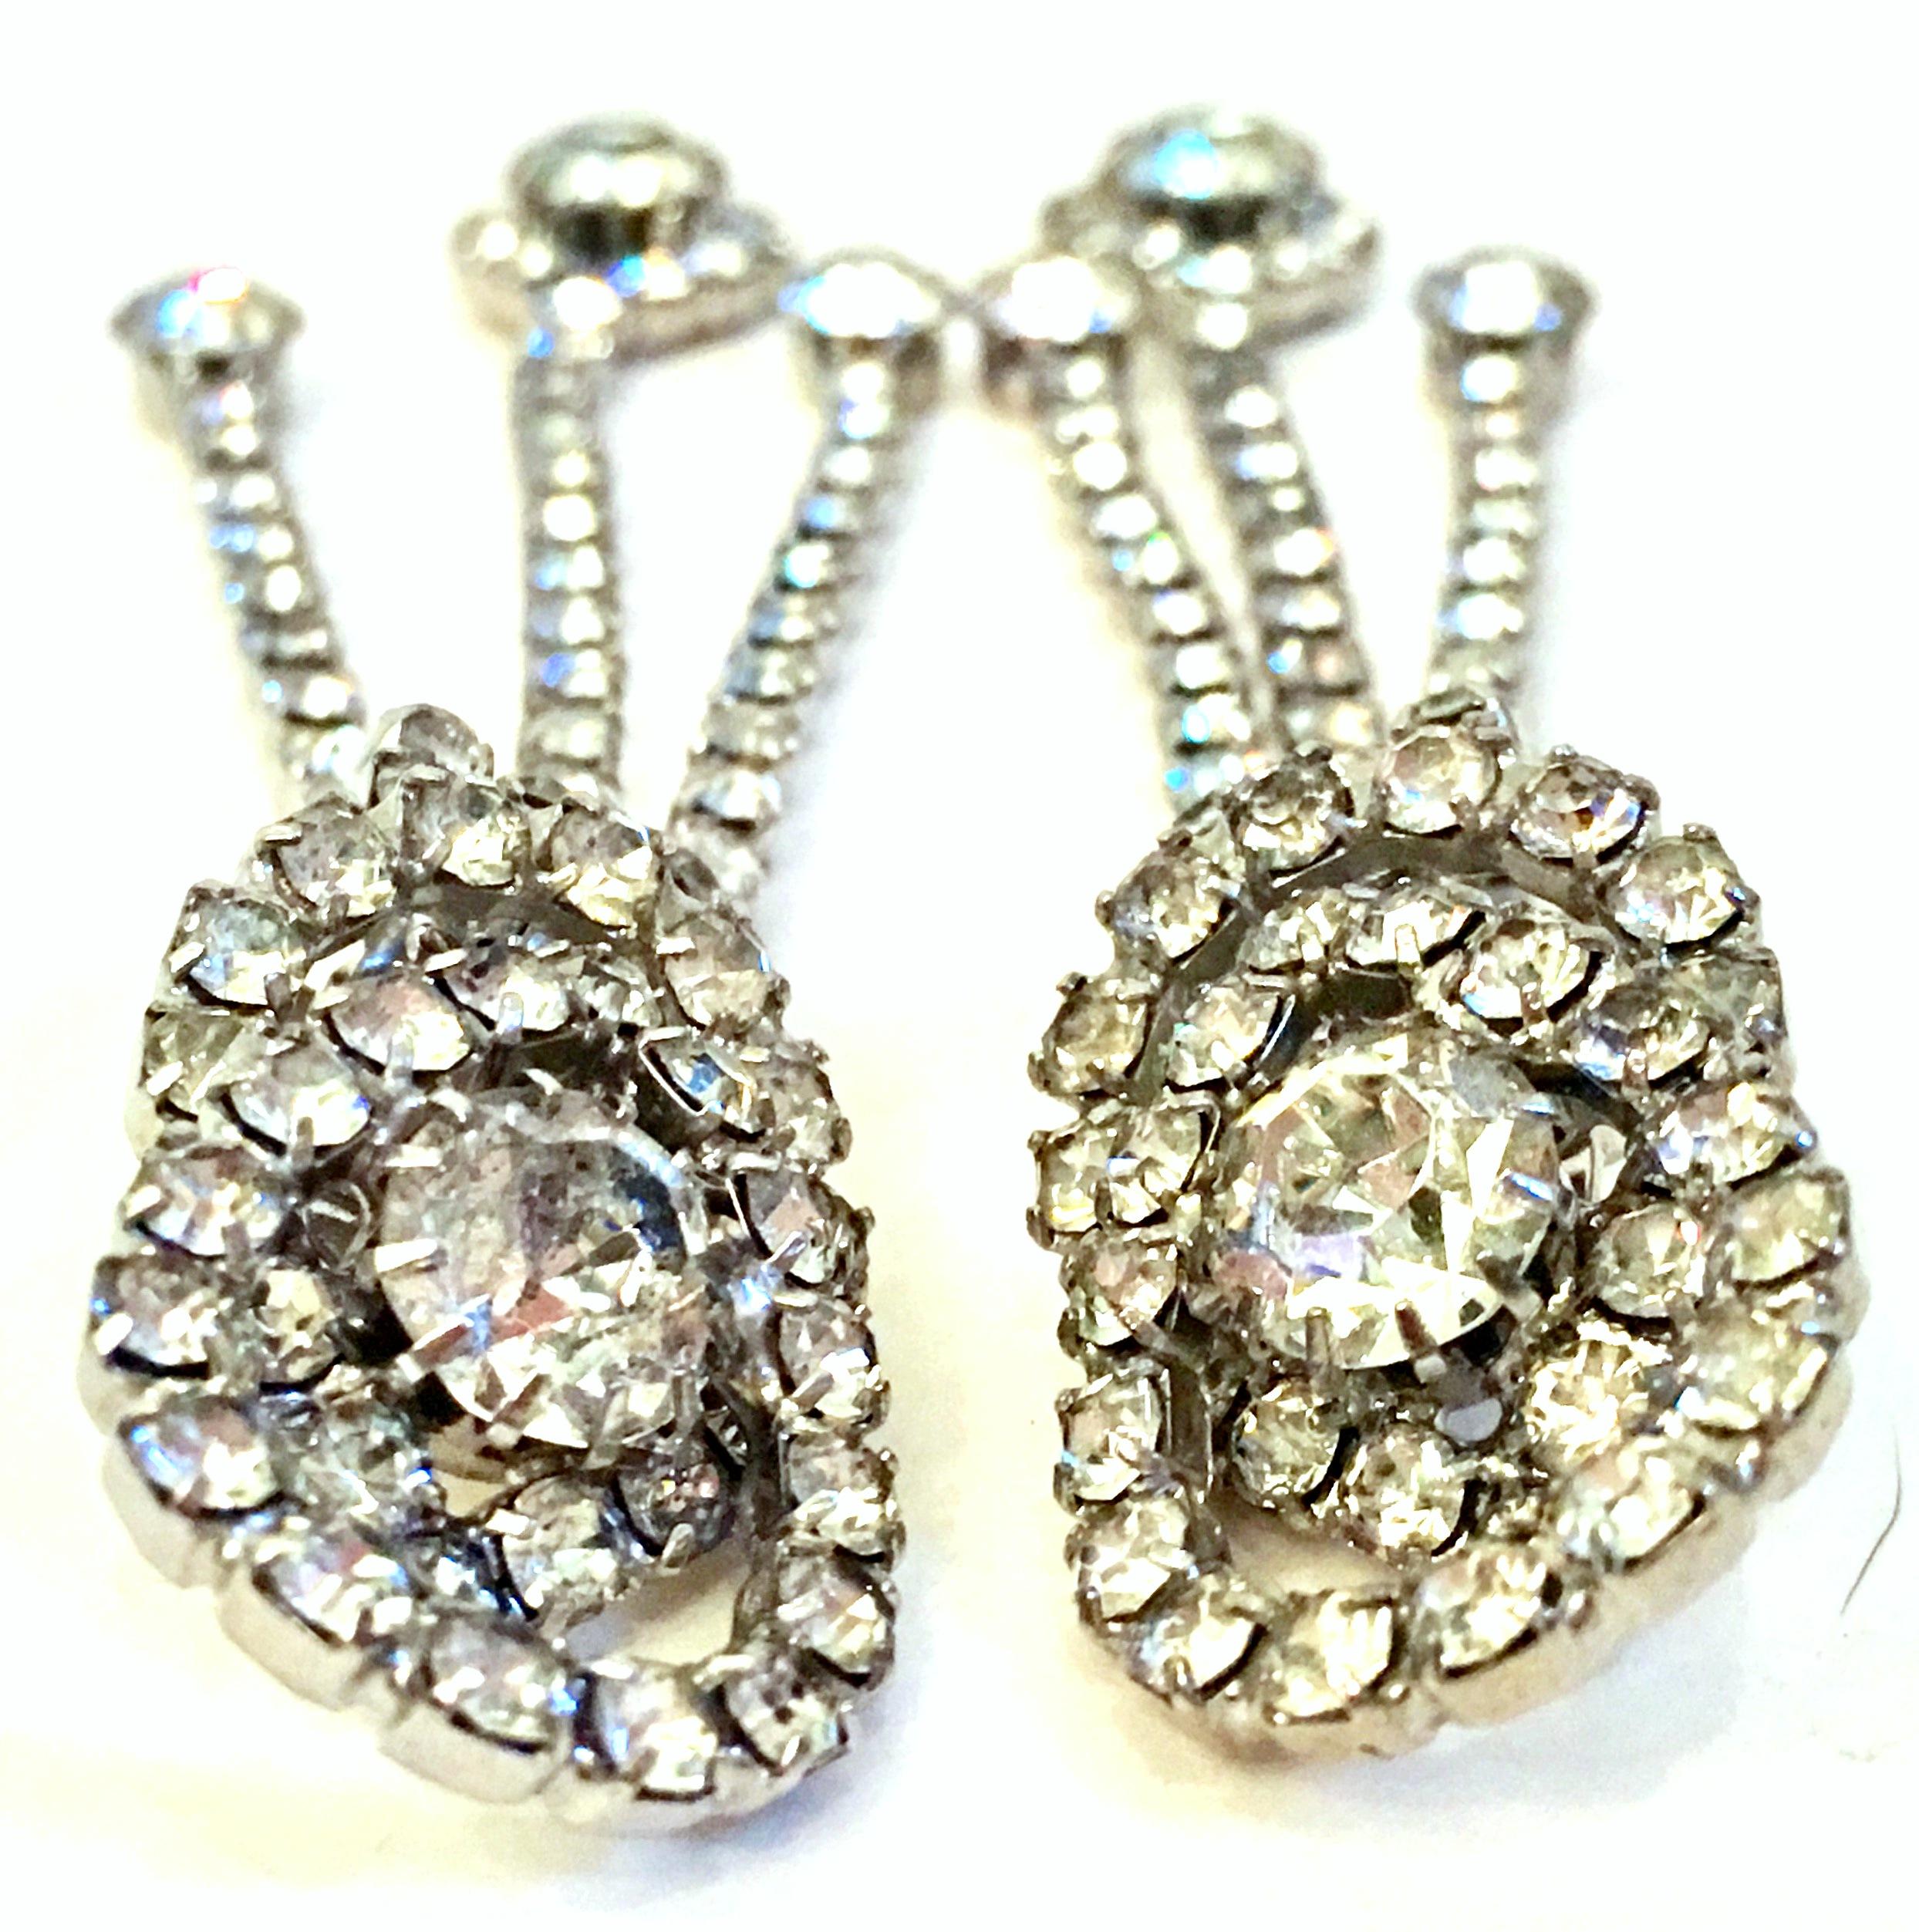 1960's  Silver & Austrian Crystal Dimensional Dangle Earrings. These long clip style earrings feature brilliant cut and faceted prong set colorless stones set in silver rhodium plate.